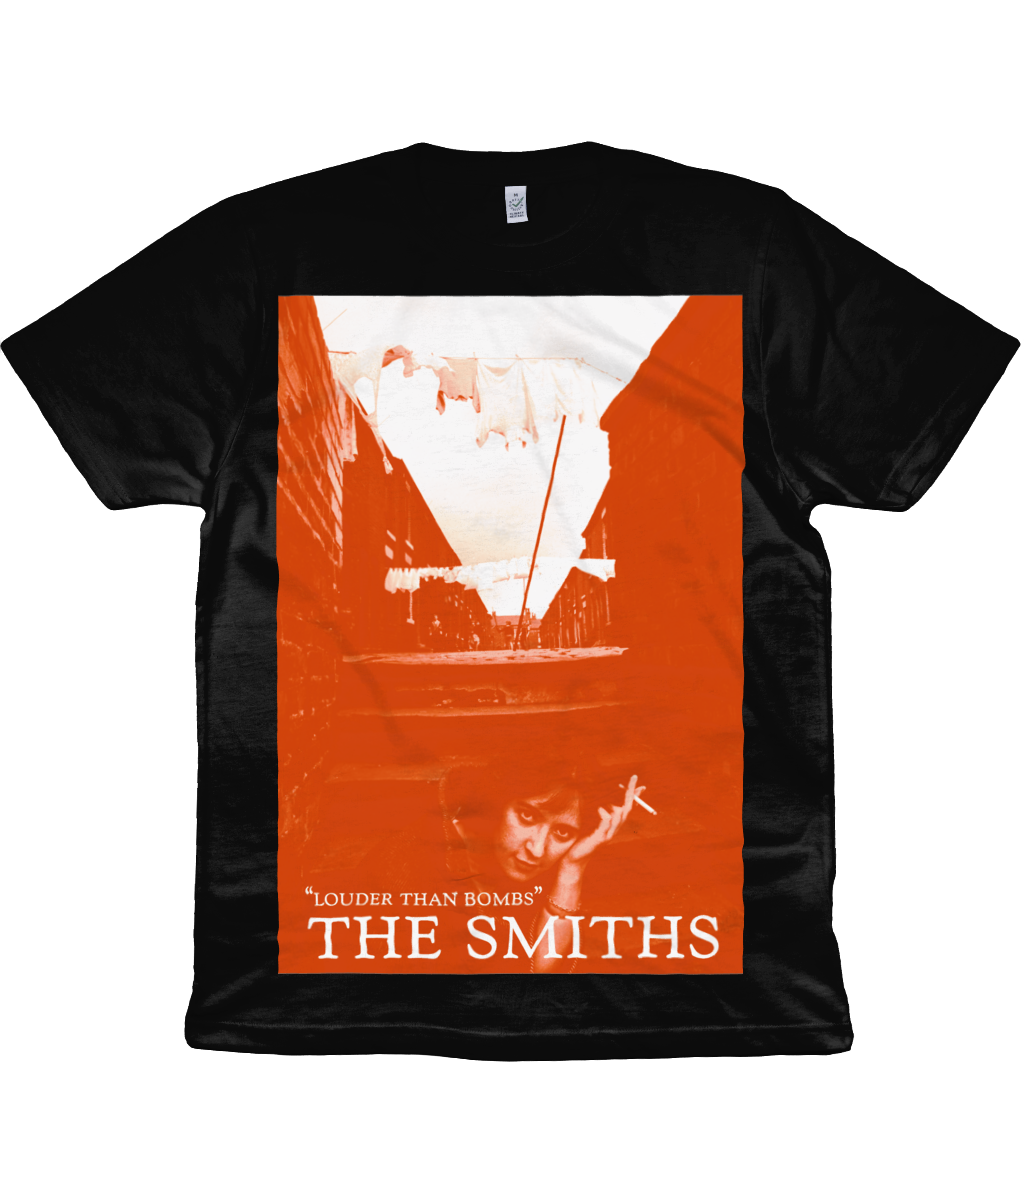 THE SMITHS - LOUDER THAN BOMBS - 1987 - PROMO